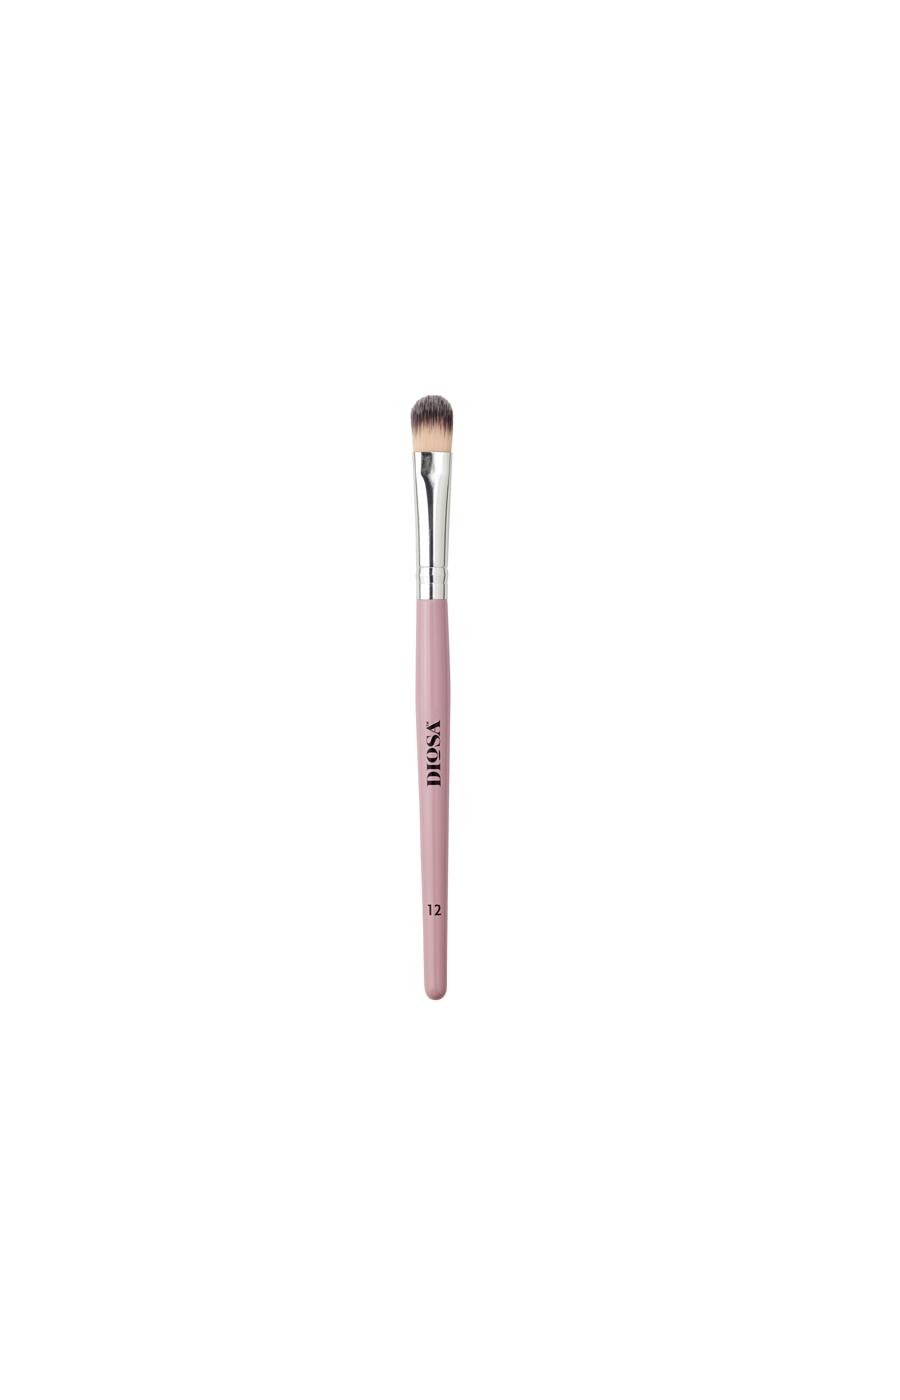 Diosa Concealer Brush - 12; image 2 of 2